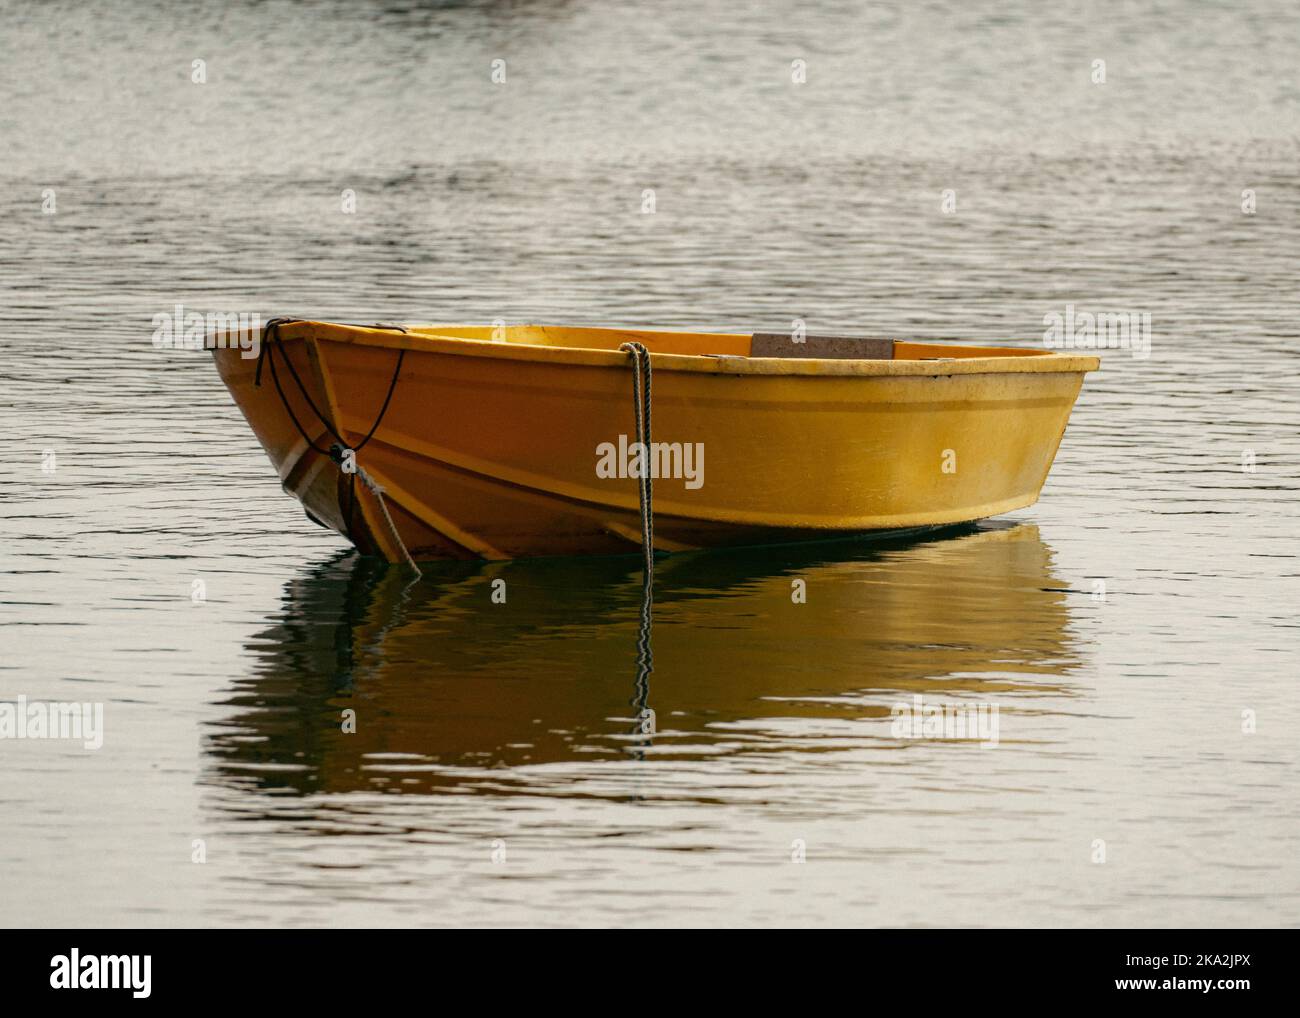 The yellow single fishing boat in the pond, close-up Stock Photo